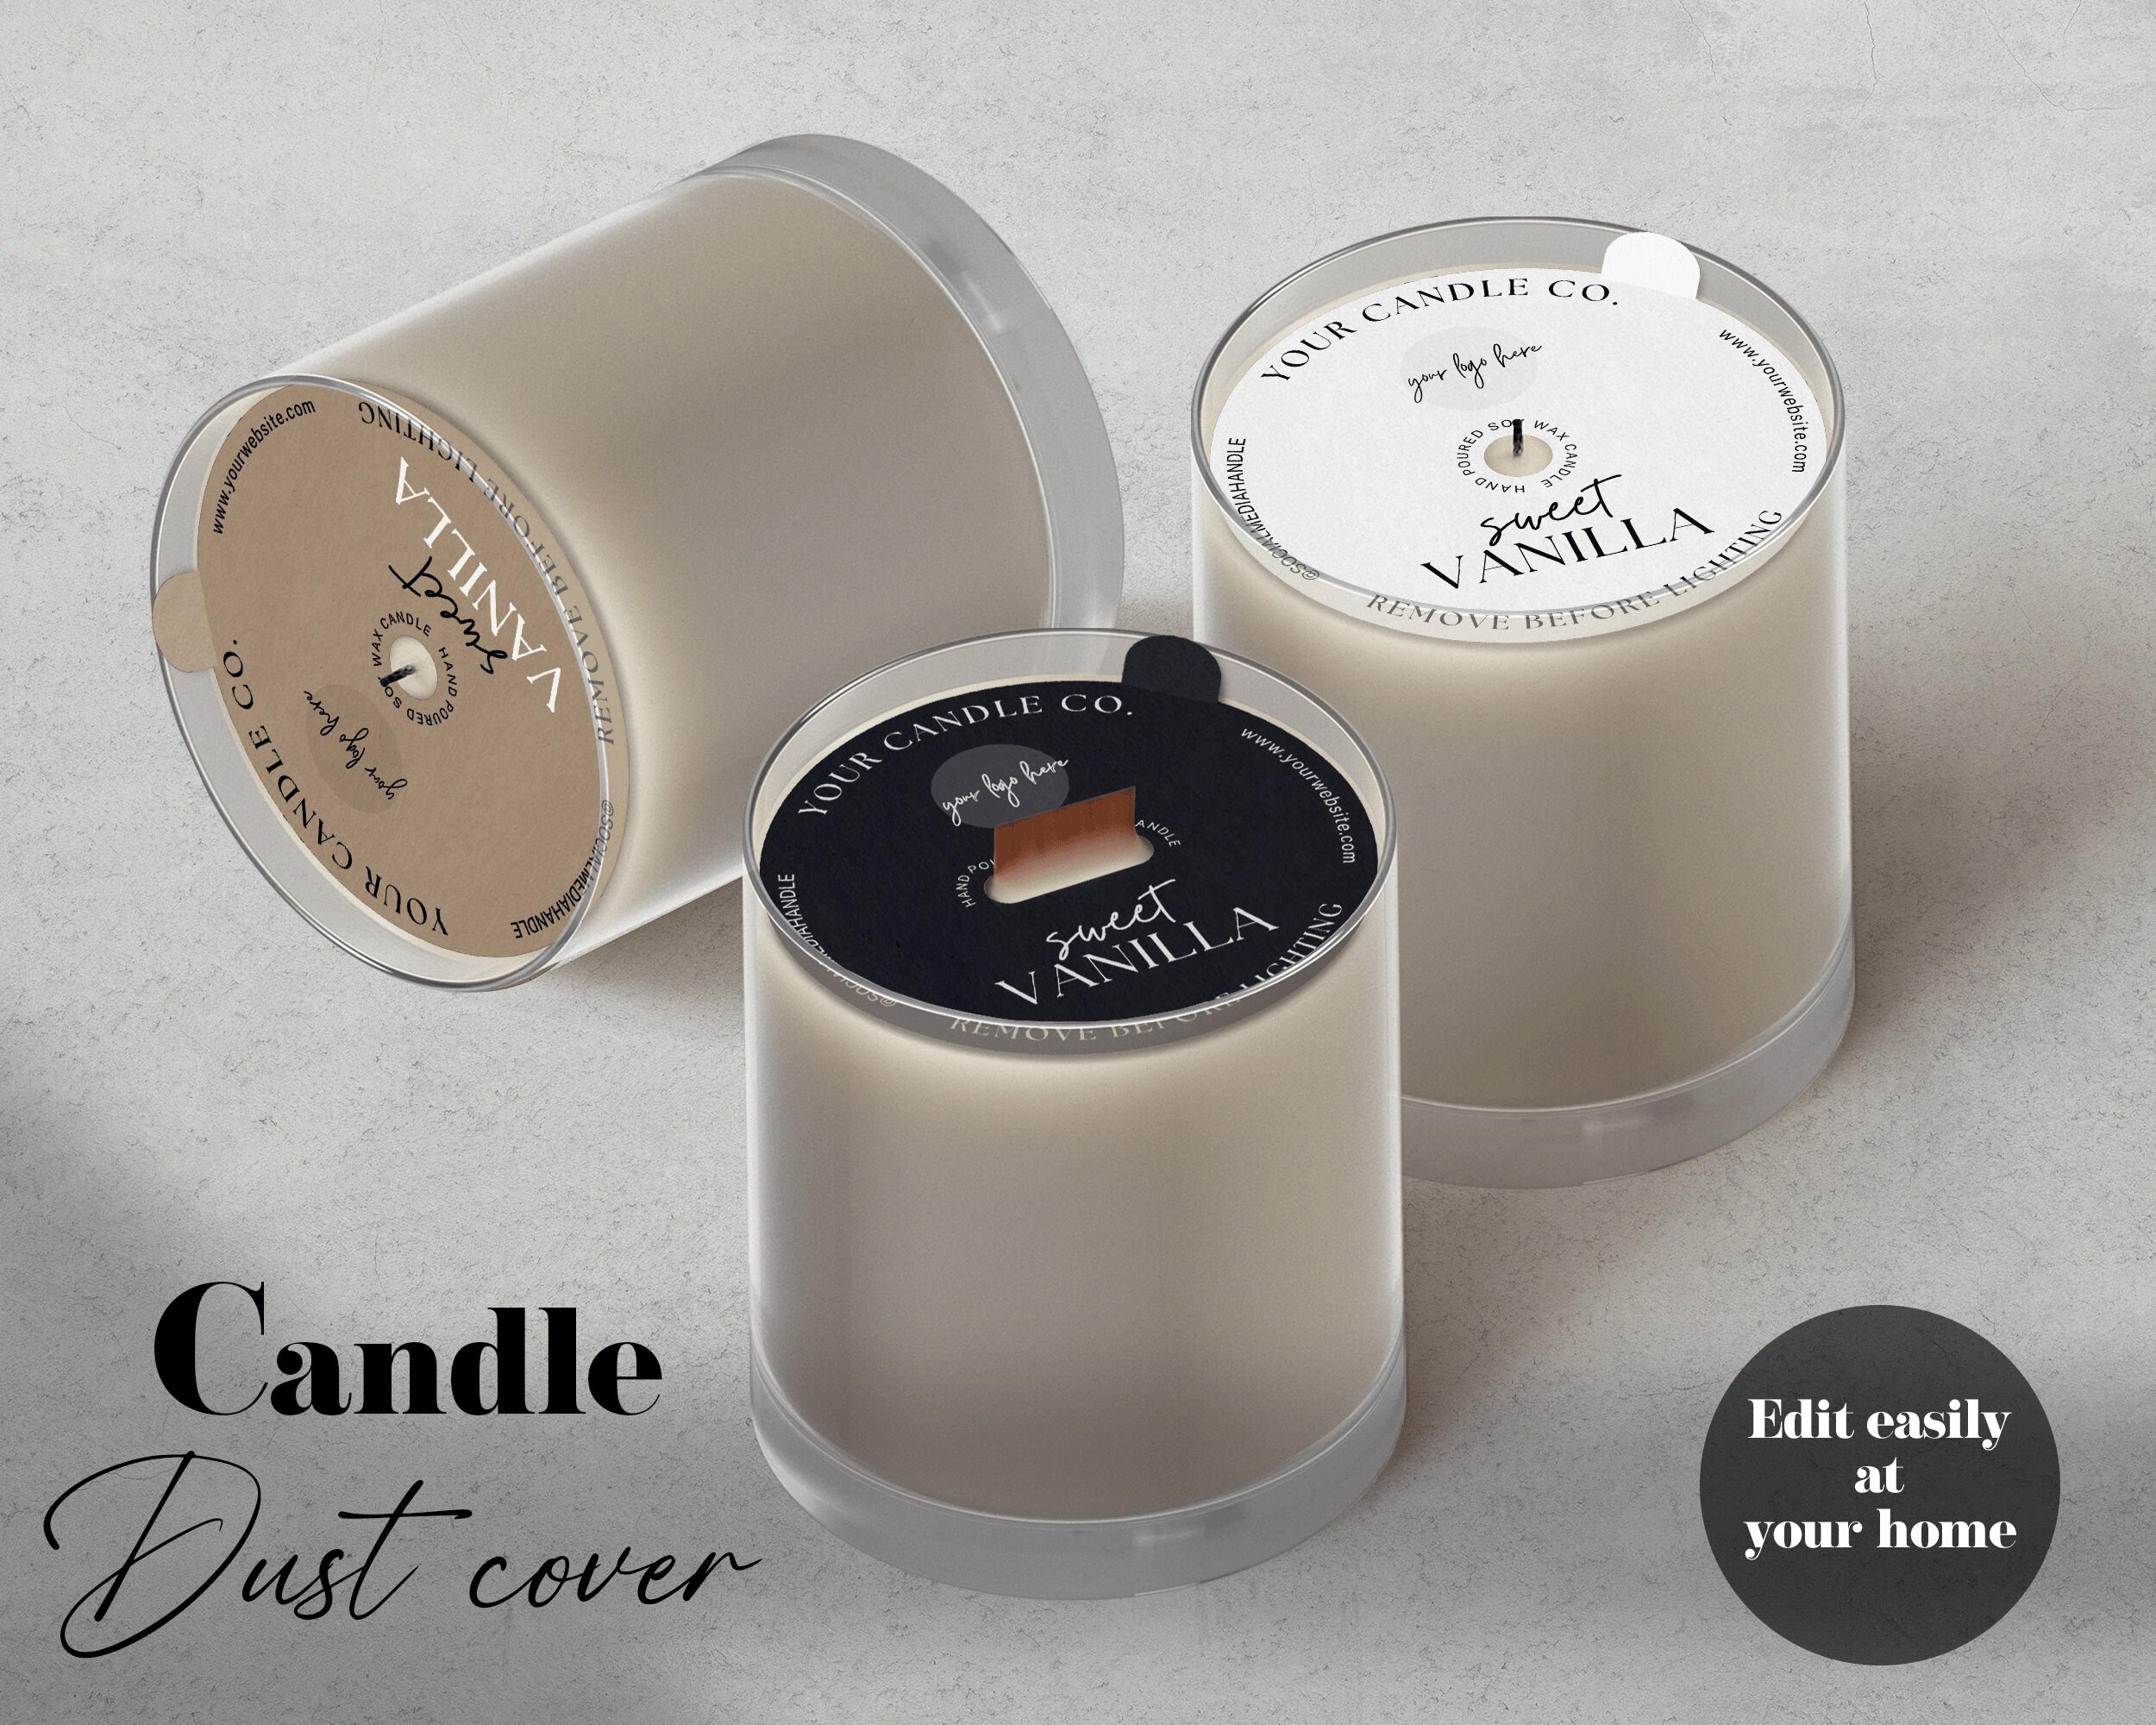 Candle Dust Covers Template, Editable Dust Cover Design, Candle Cover Dust  Lid Design, Candle Packaging for Candle Business, Candle Label 